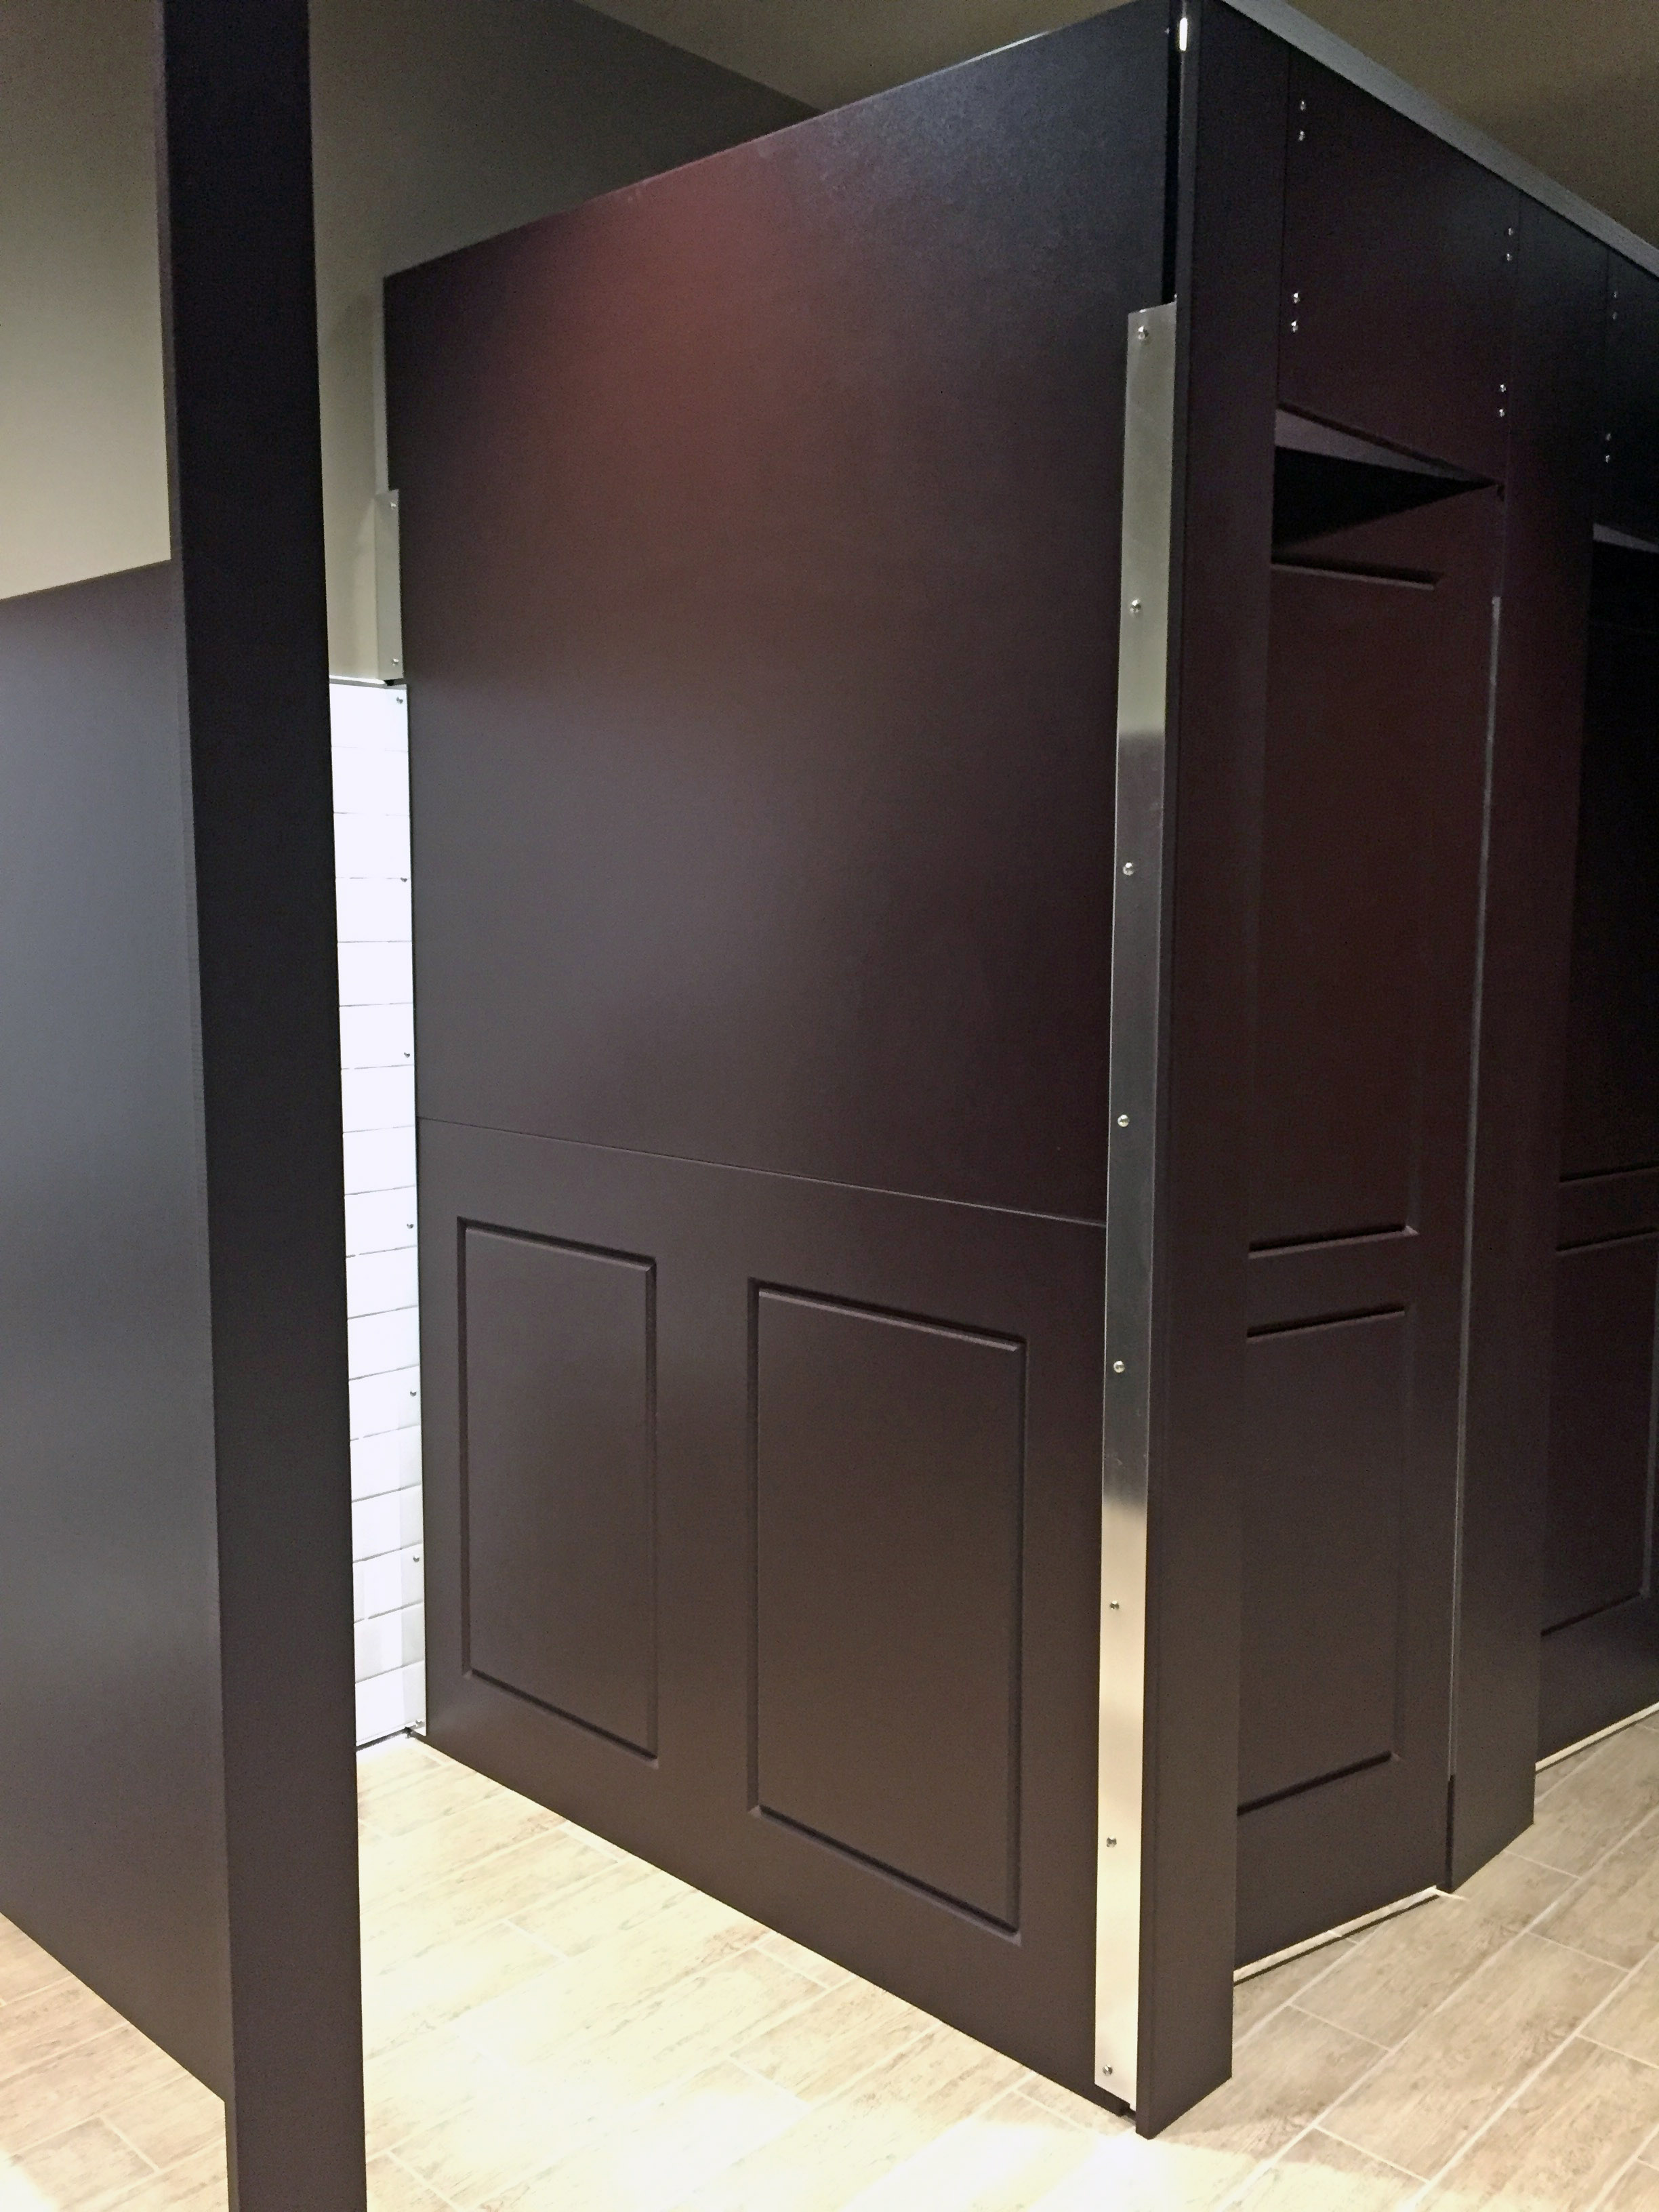 SRBX chose Aria Partitions in Mahogany color to complement their rich color motif.